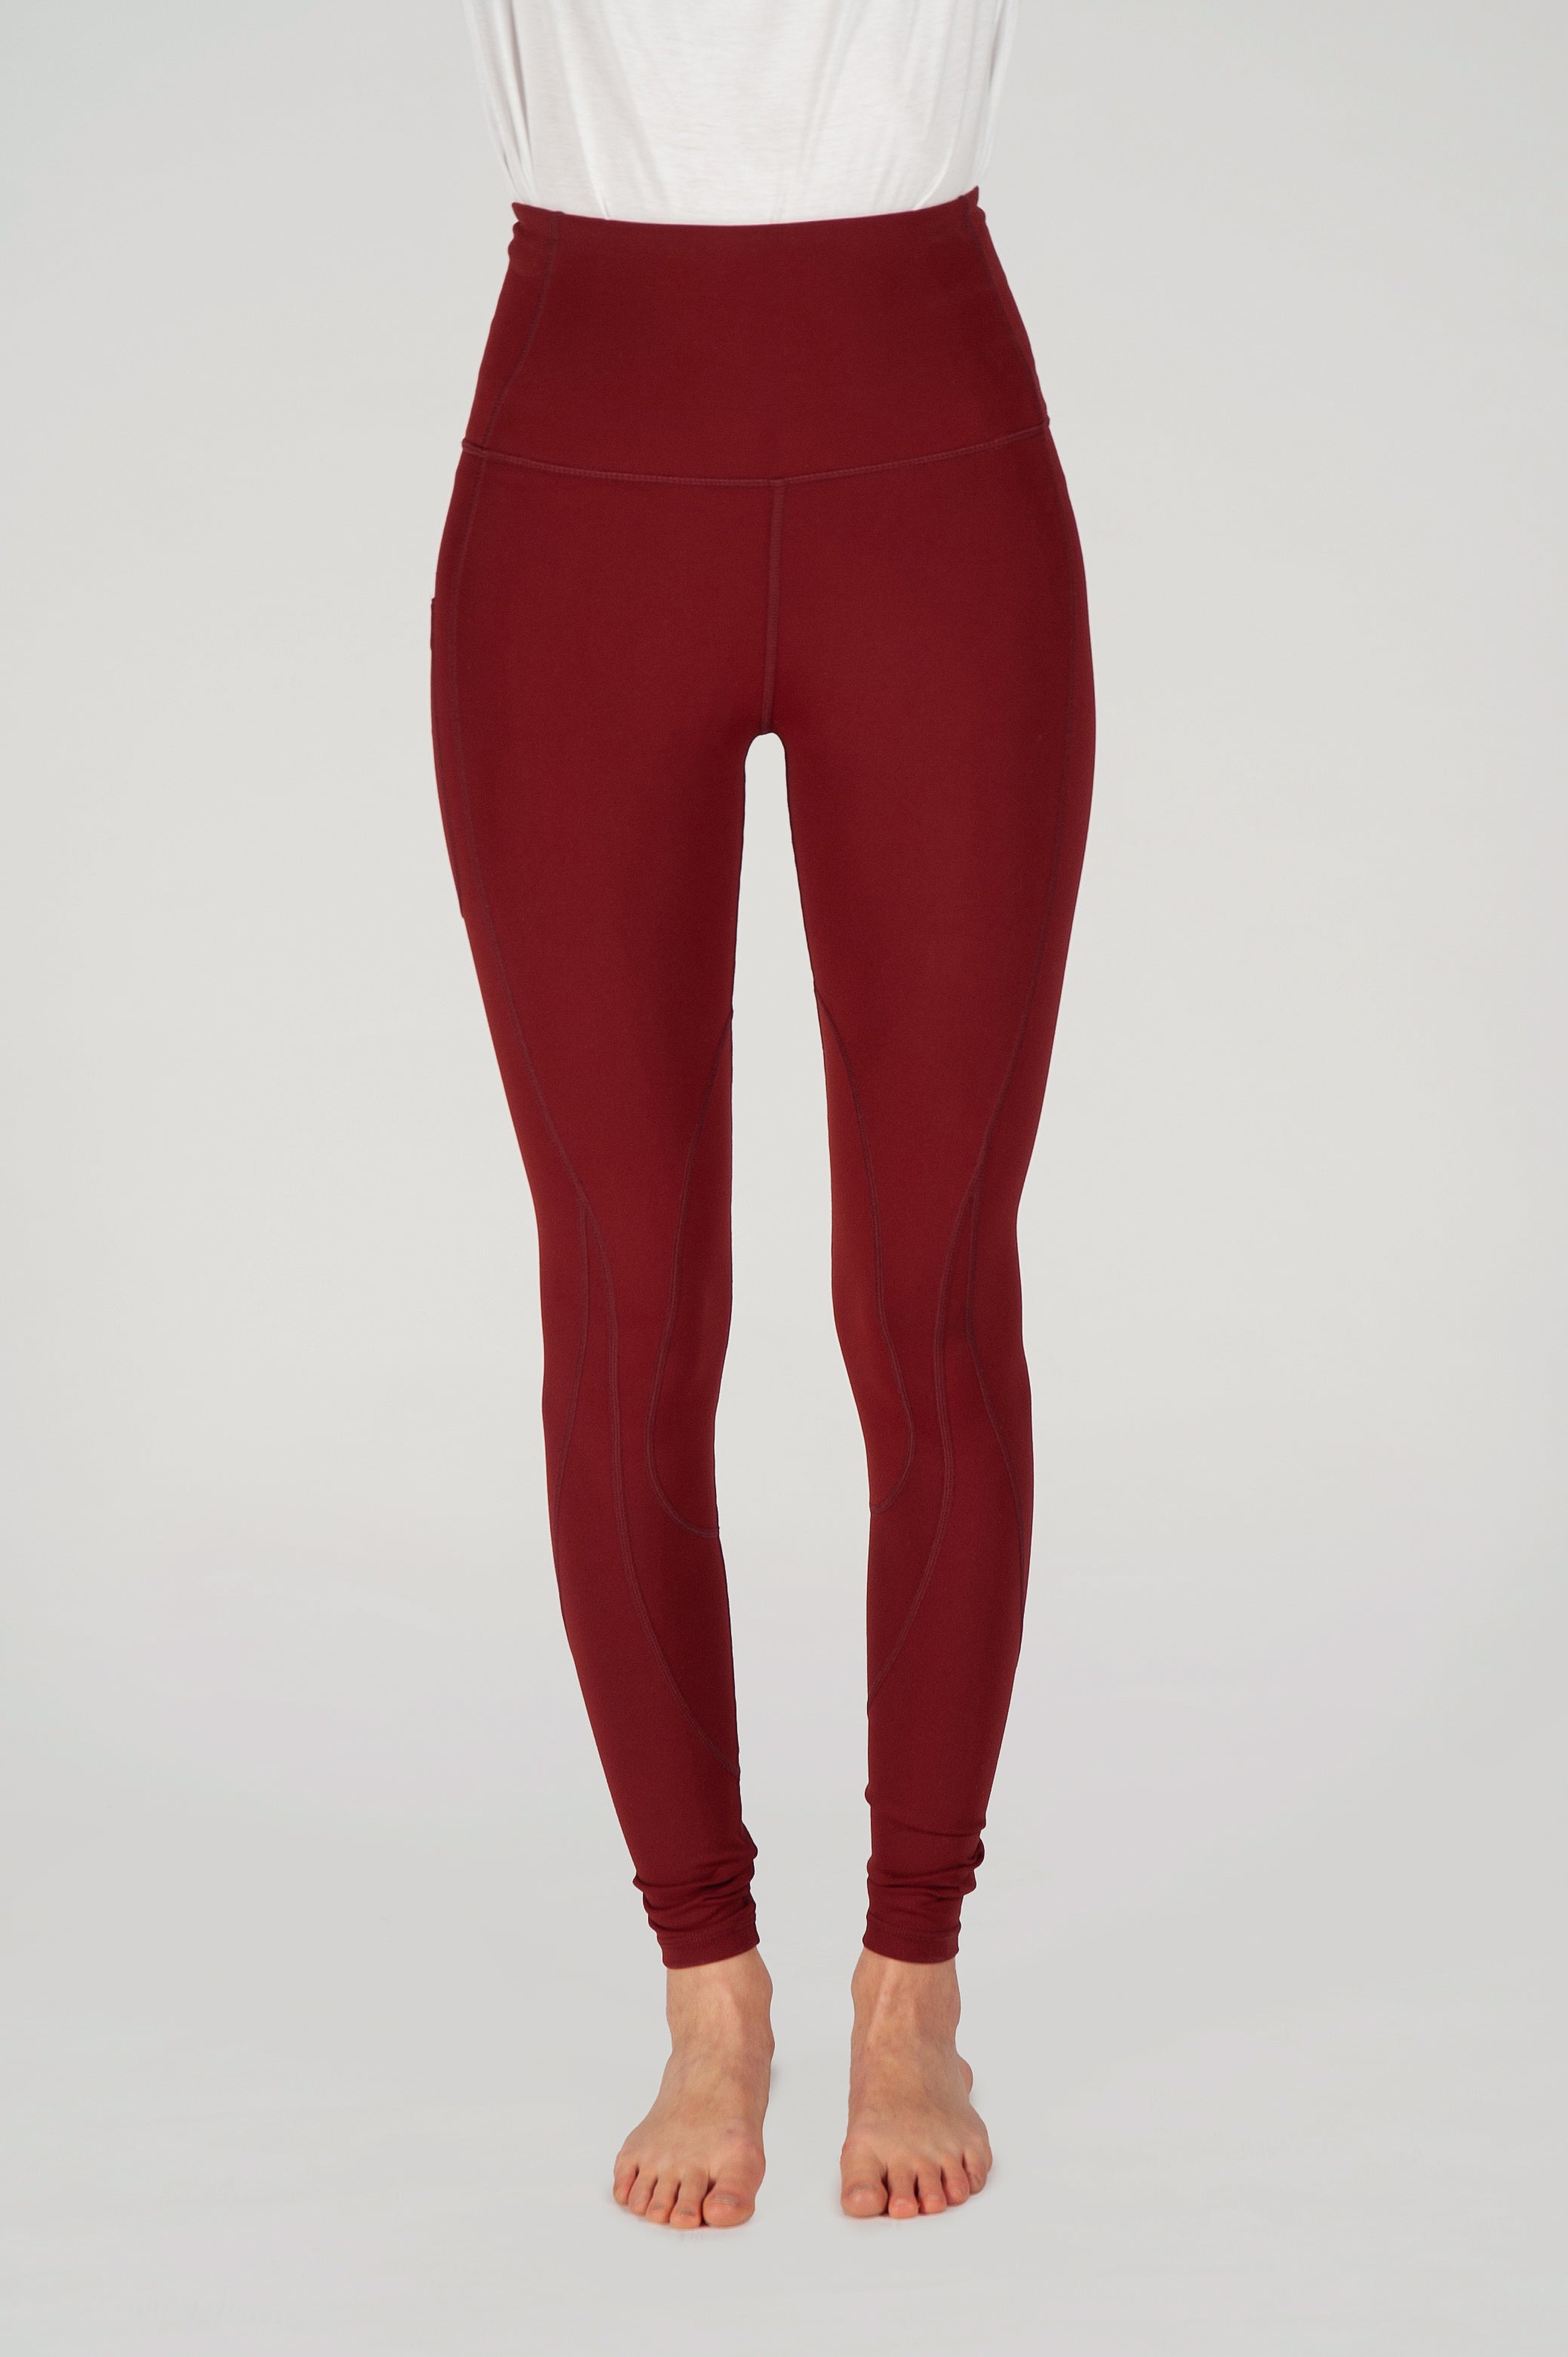 Wine Flexars - Red Riding Tights